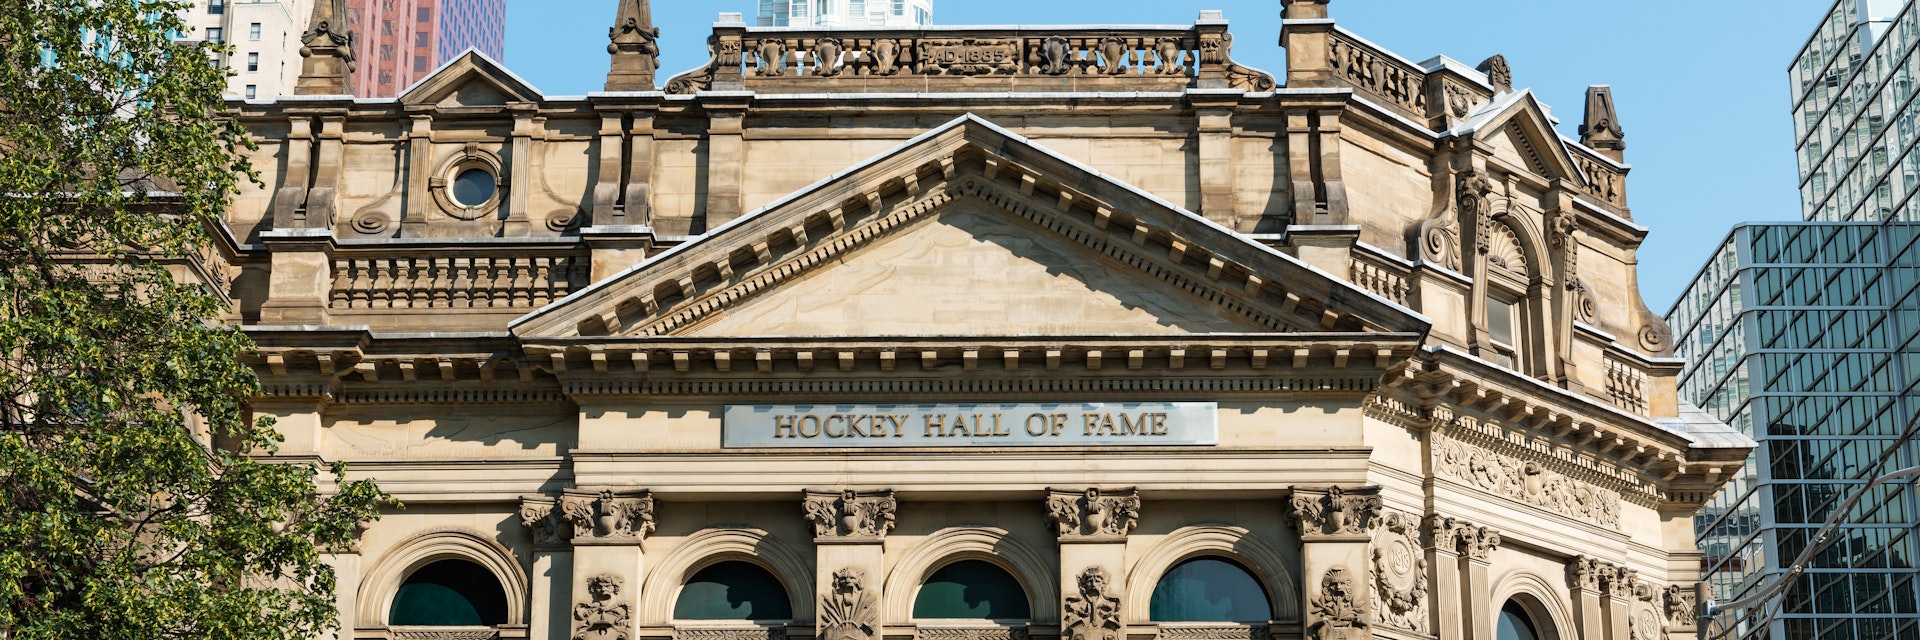 Toronto, Canada - September 5, 2015: Front facade of the Hockey Hall of Fame in Toronto, Ontario, a building dedicated to the history of ice hockey and home to the Stanley Cup.
493697002
National Hockey League, Front Street, Stanley Cup, City Life, Fame, Collection, Downtown District, Souvenir, Exhibition, Facade, Art Museum, Skyscraper, Sidewalk, Canadian Culture, History, Blue, International Landmark, Famous Place, Architecture, Sport, Wide Angle, Urban Scene, Ice Hockey, Sports Team, Toronto, Ontario - Canada, Canada, North America, Summer, Trophy, Bank, Museum, Street, Avenue, Tower, Built Structure, Financial District, City, Cup, Hall Of Fame, Hockey Hall Of Fame